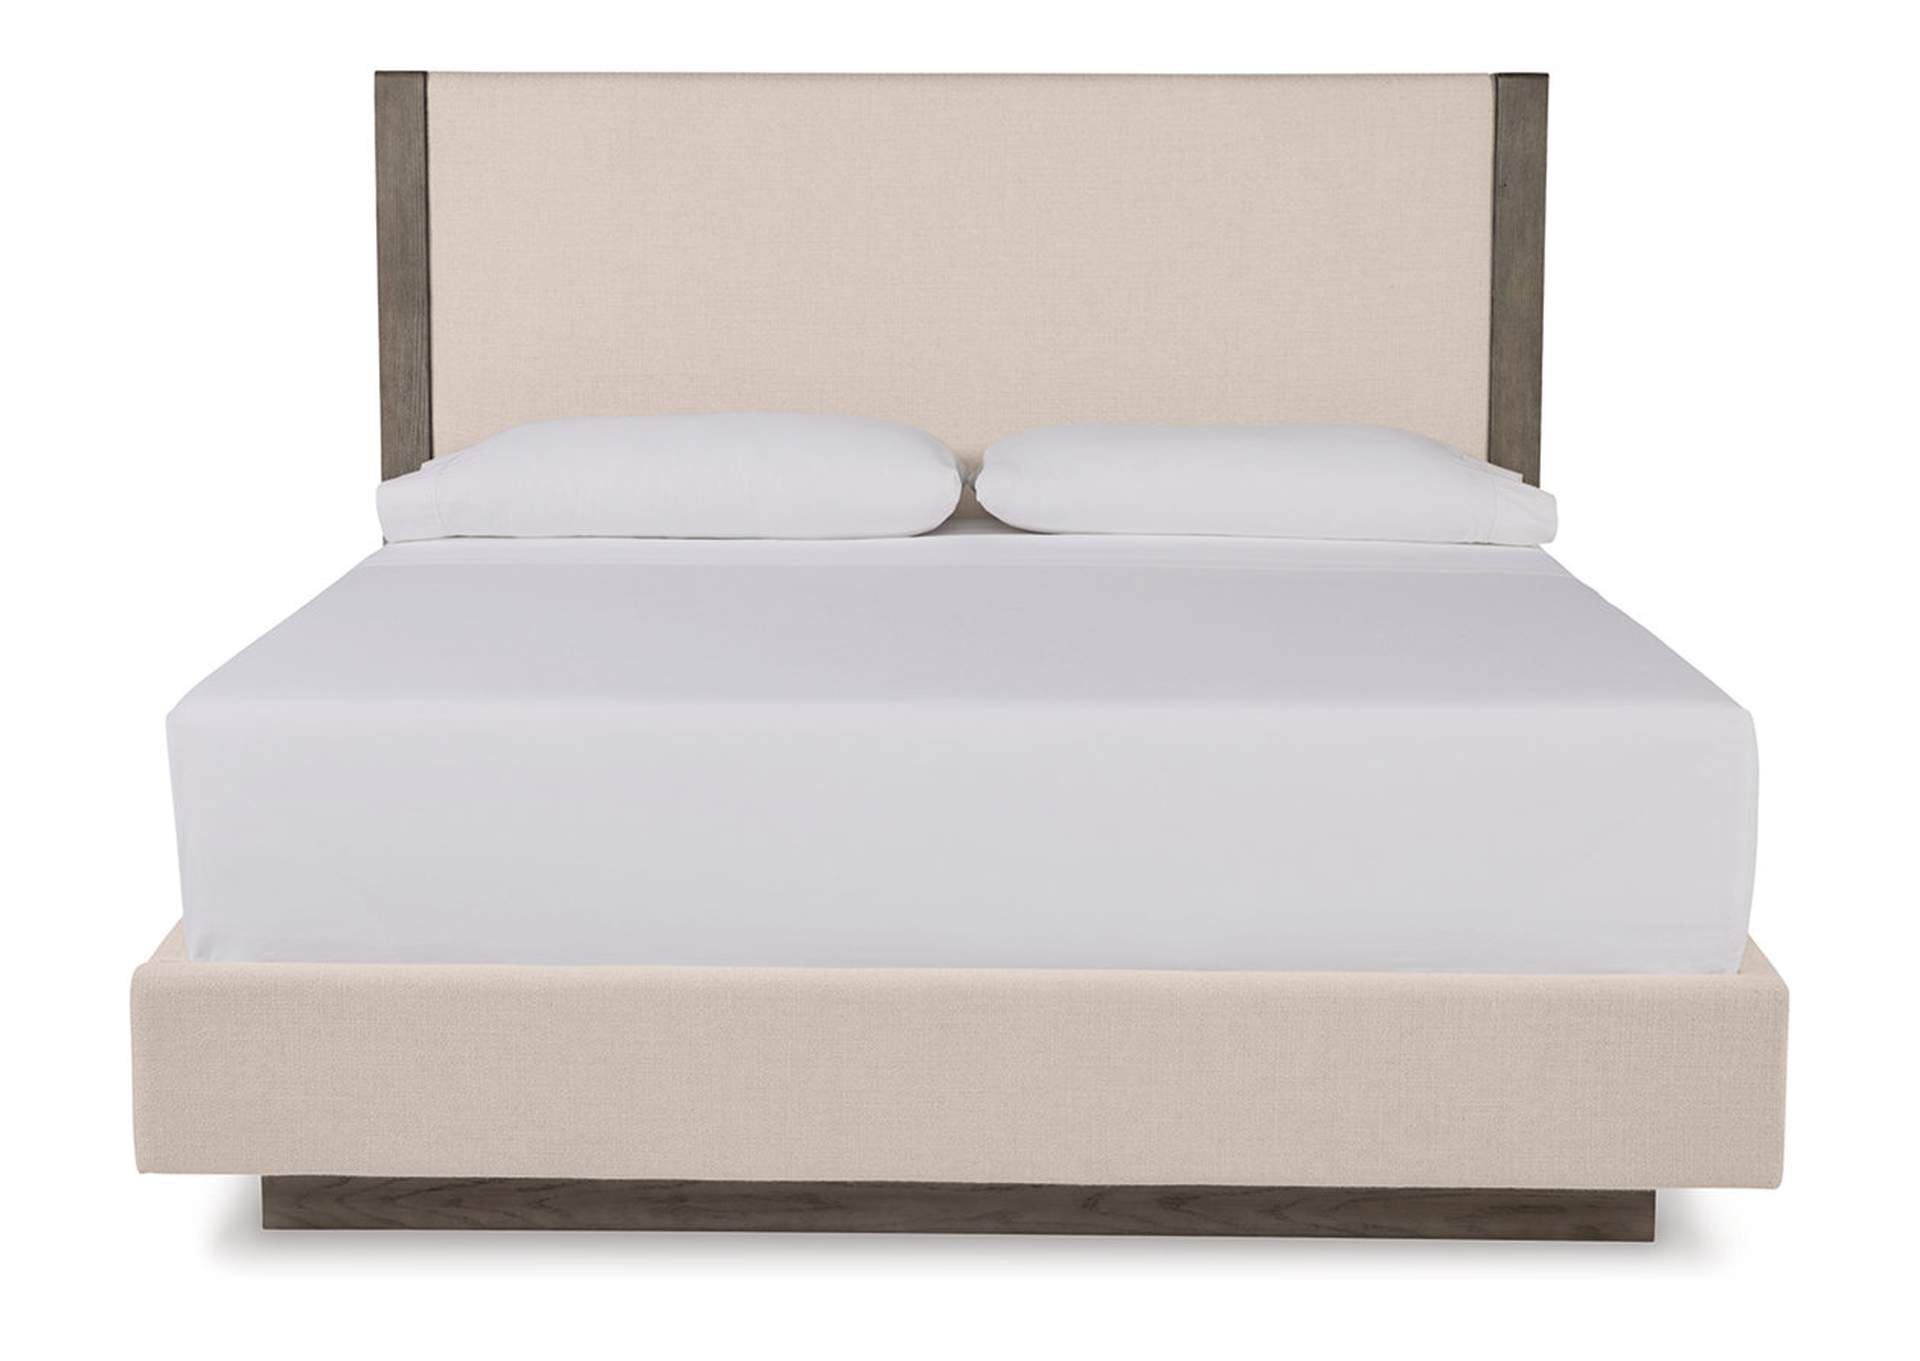 Anibecca King Upholstered Bed,Benchcraft